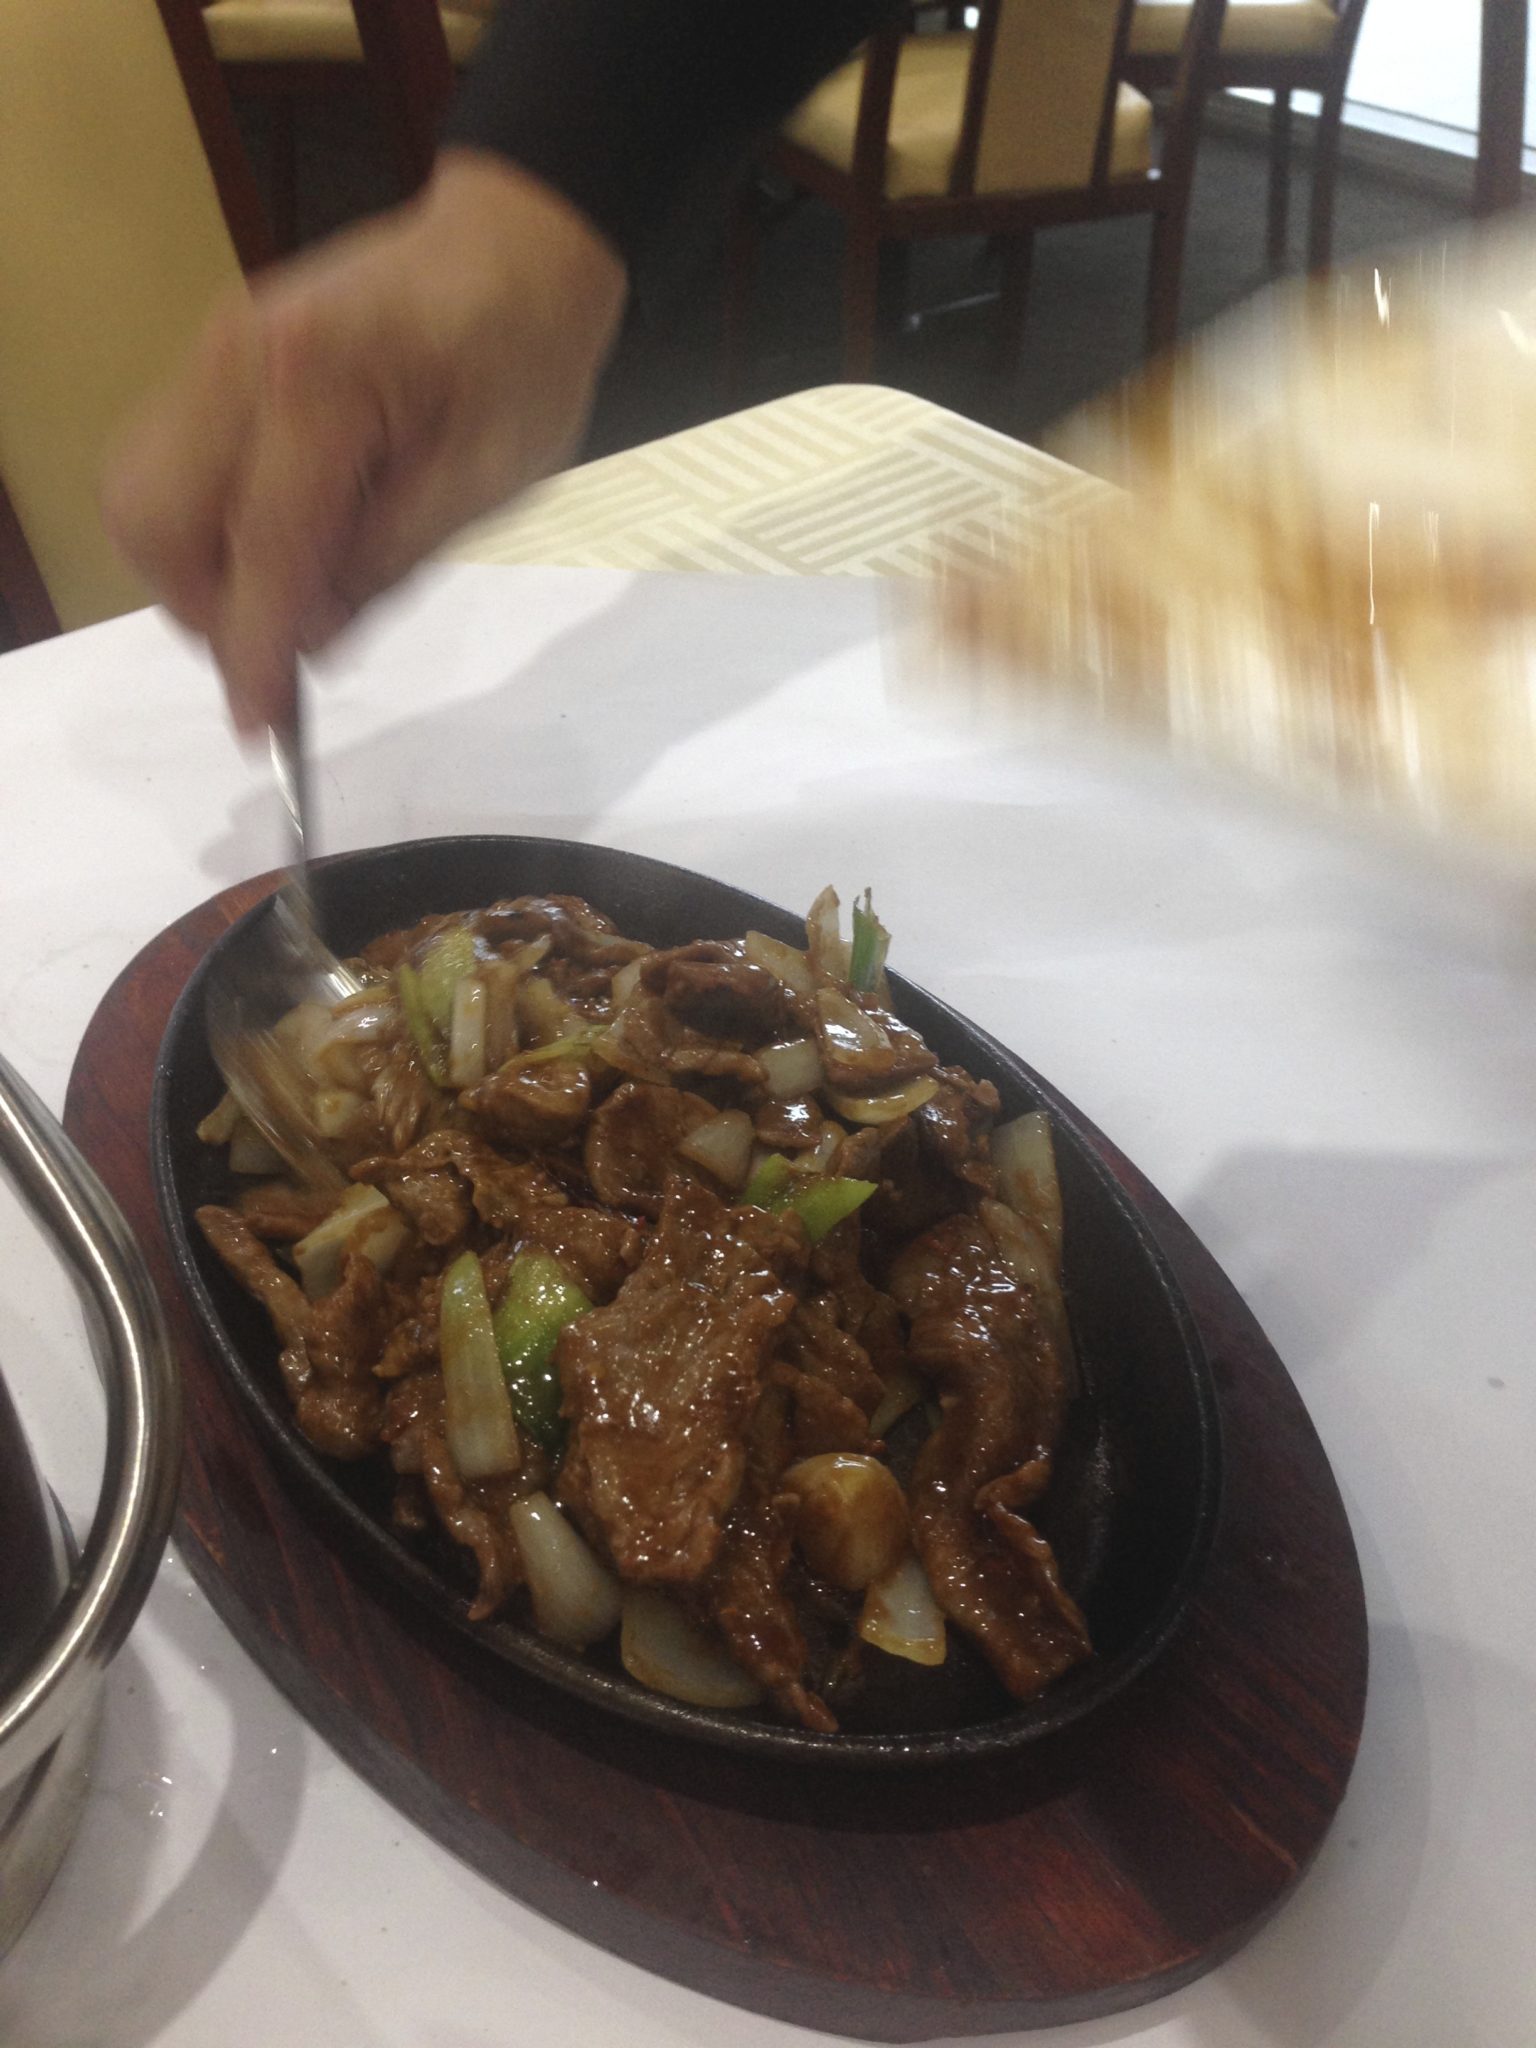 Halal Chinese in Sydney? Hello China Bowl!